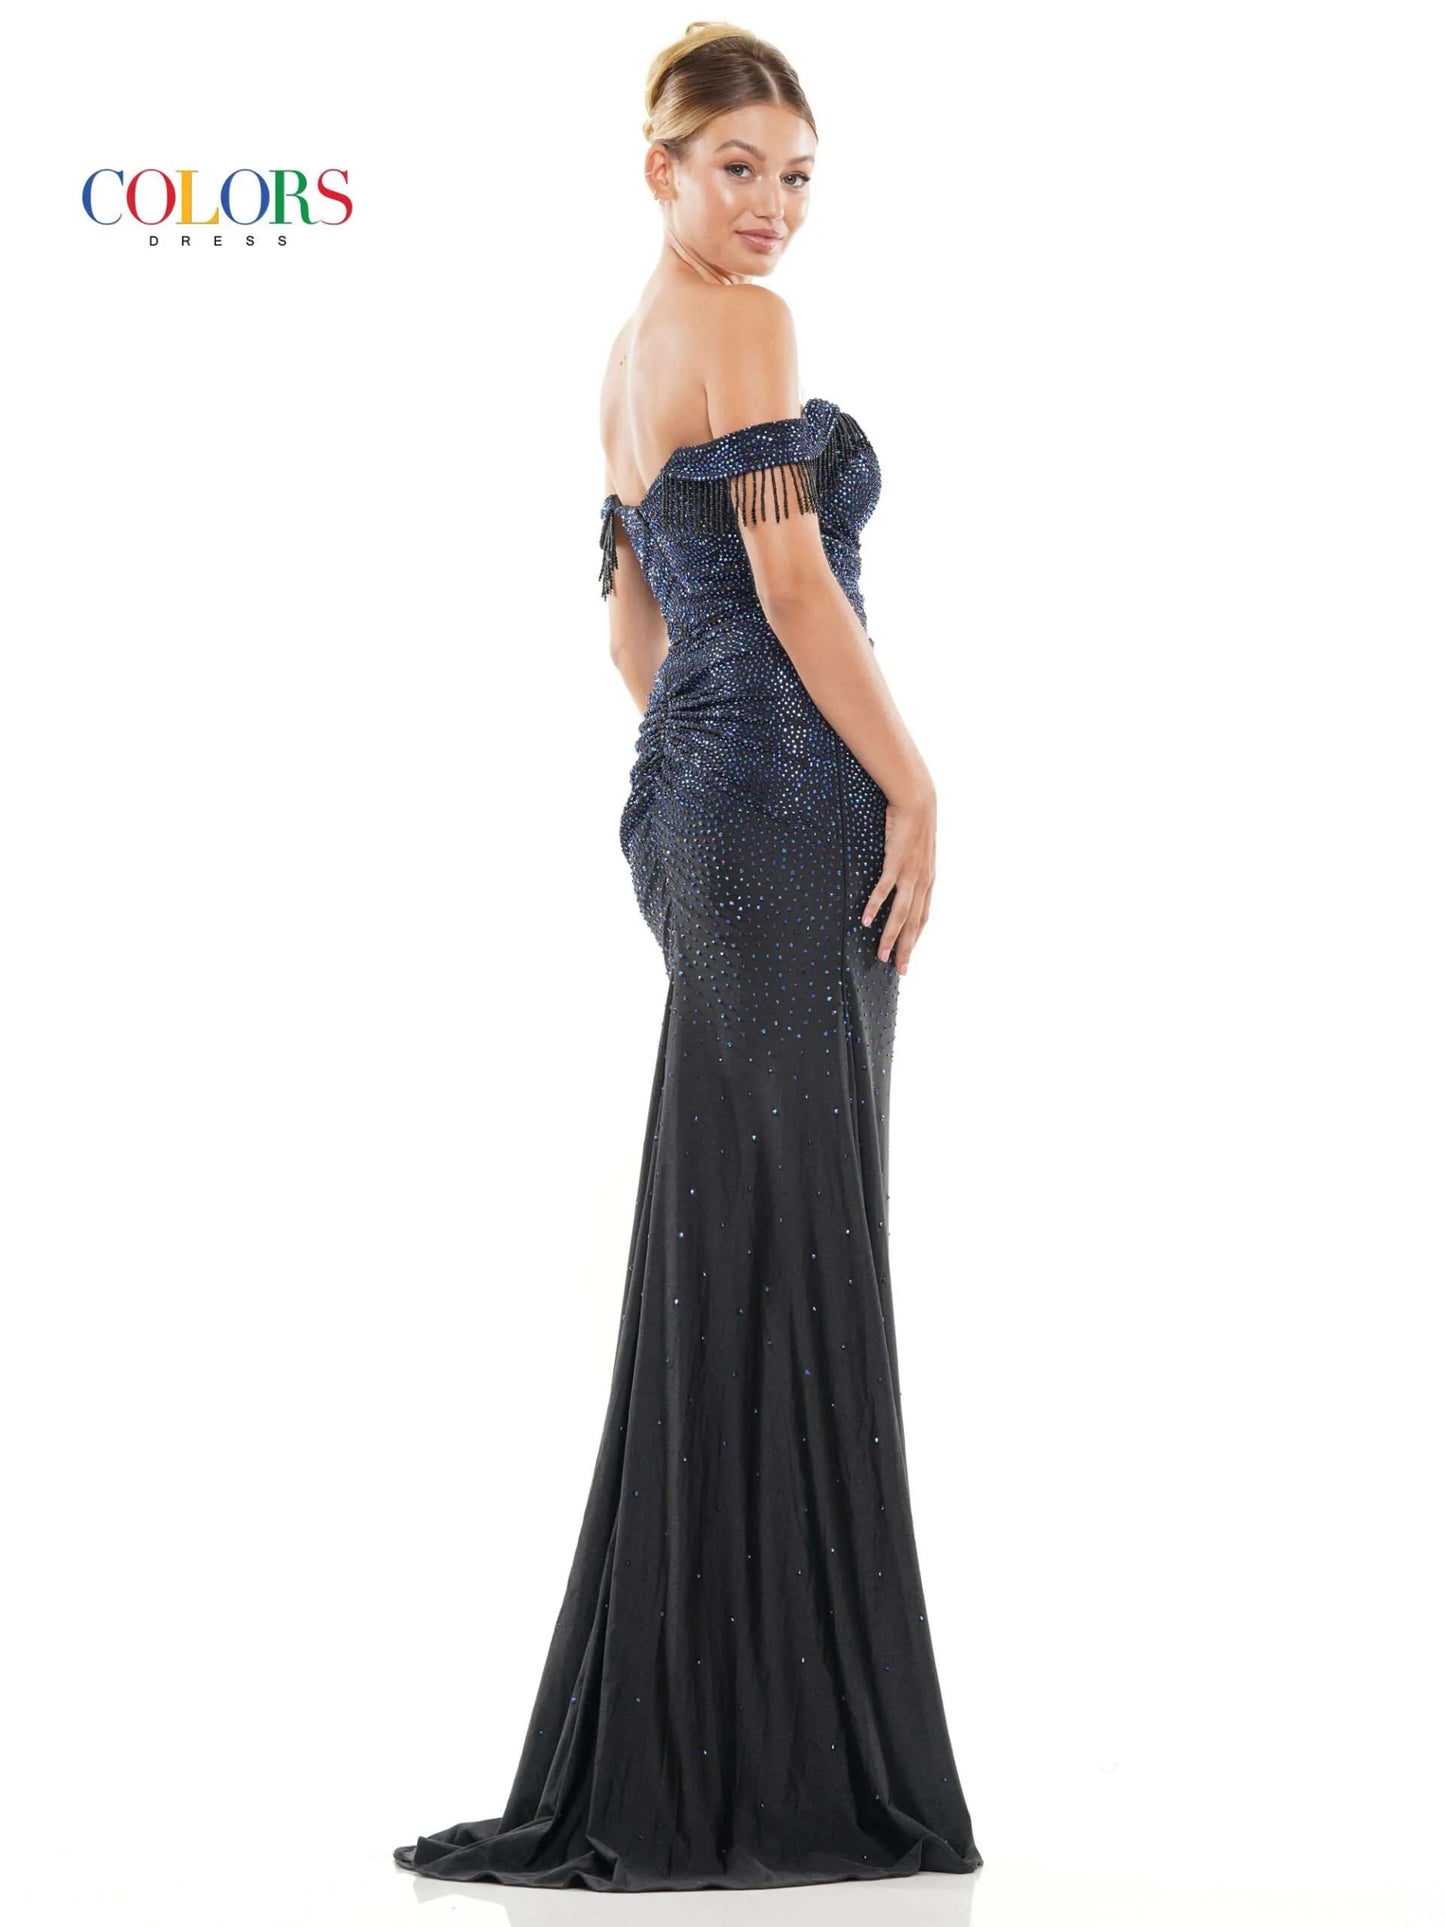 This glamorous formal dress from Colors Dress 3288 features off the shoulder fringe tassel sleeves, a crystal-studded bodice,  slit skirt, and a ruched waist detailing for a timeless and elegant look. Perfect for proms and special occasions.  Sizes: 0-22  Colors: Black, Deep Green, Turquoise